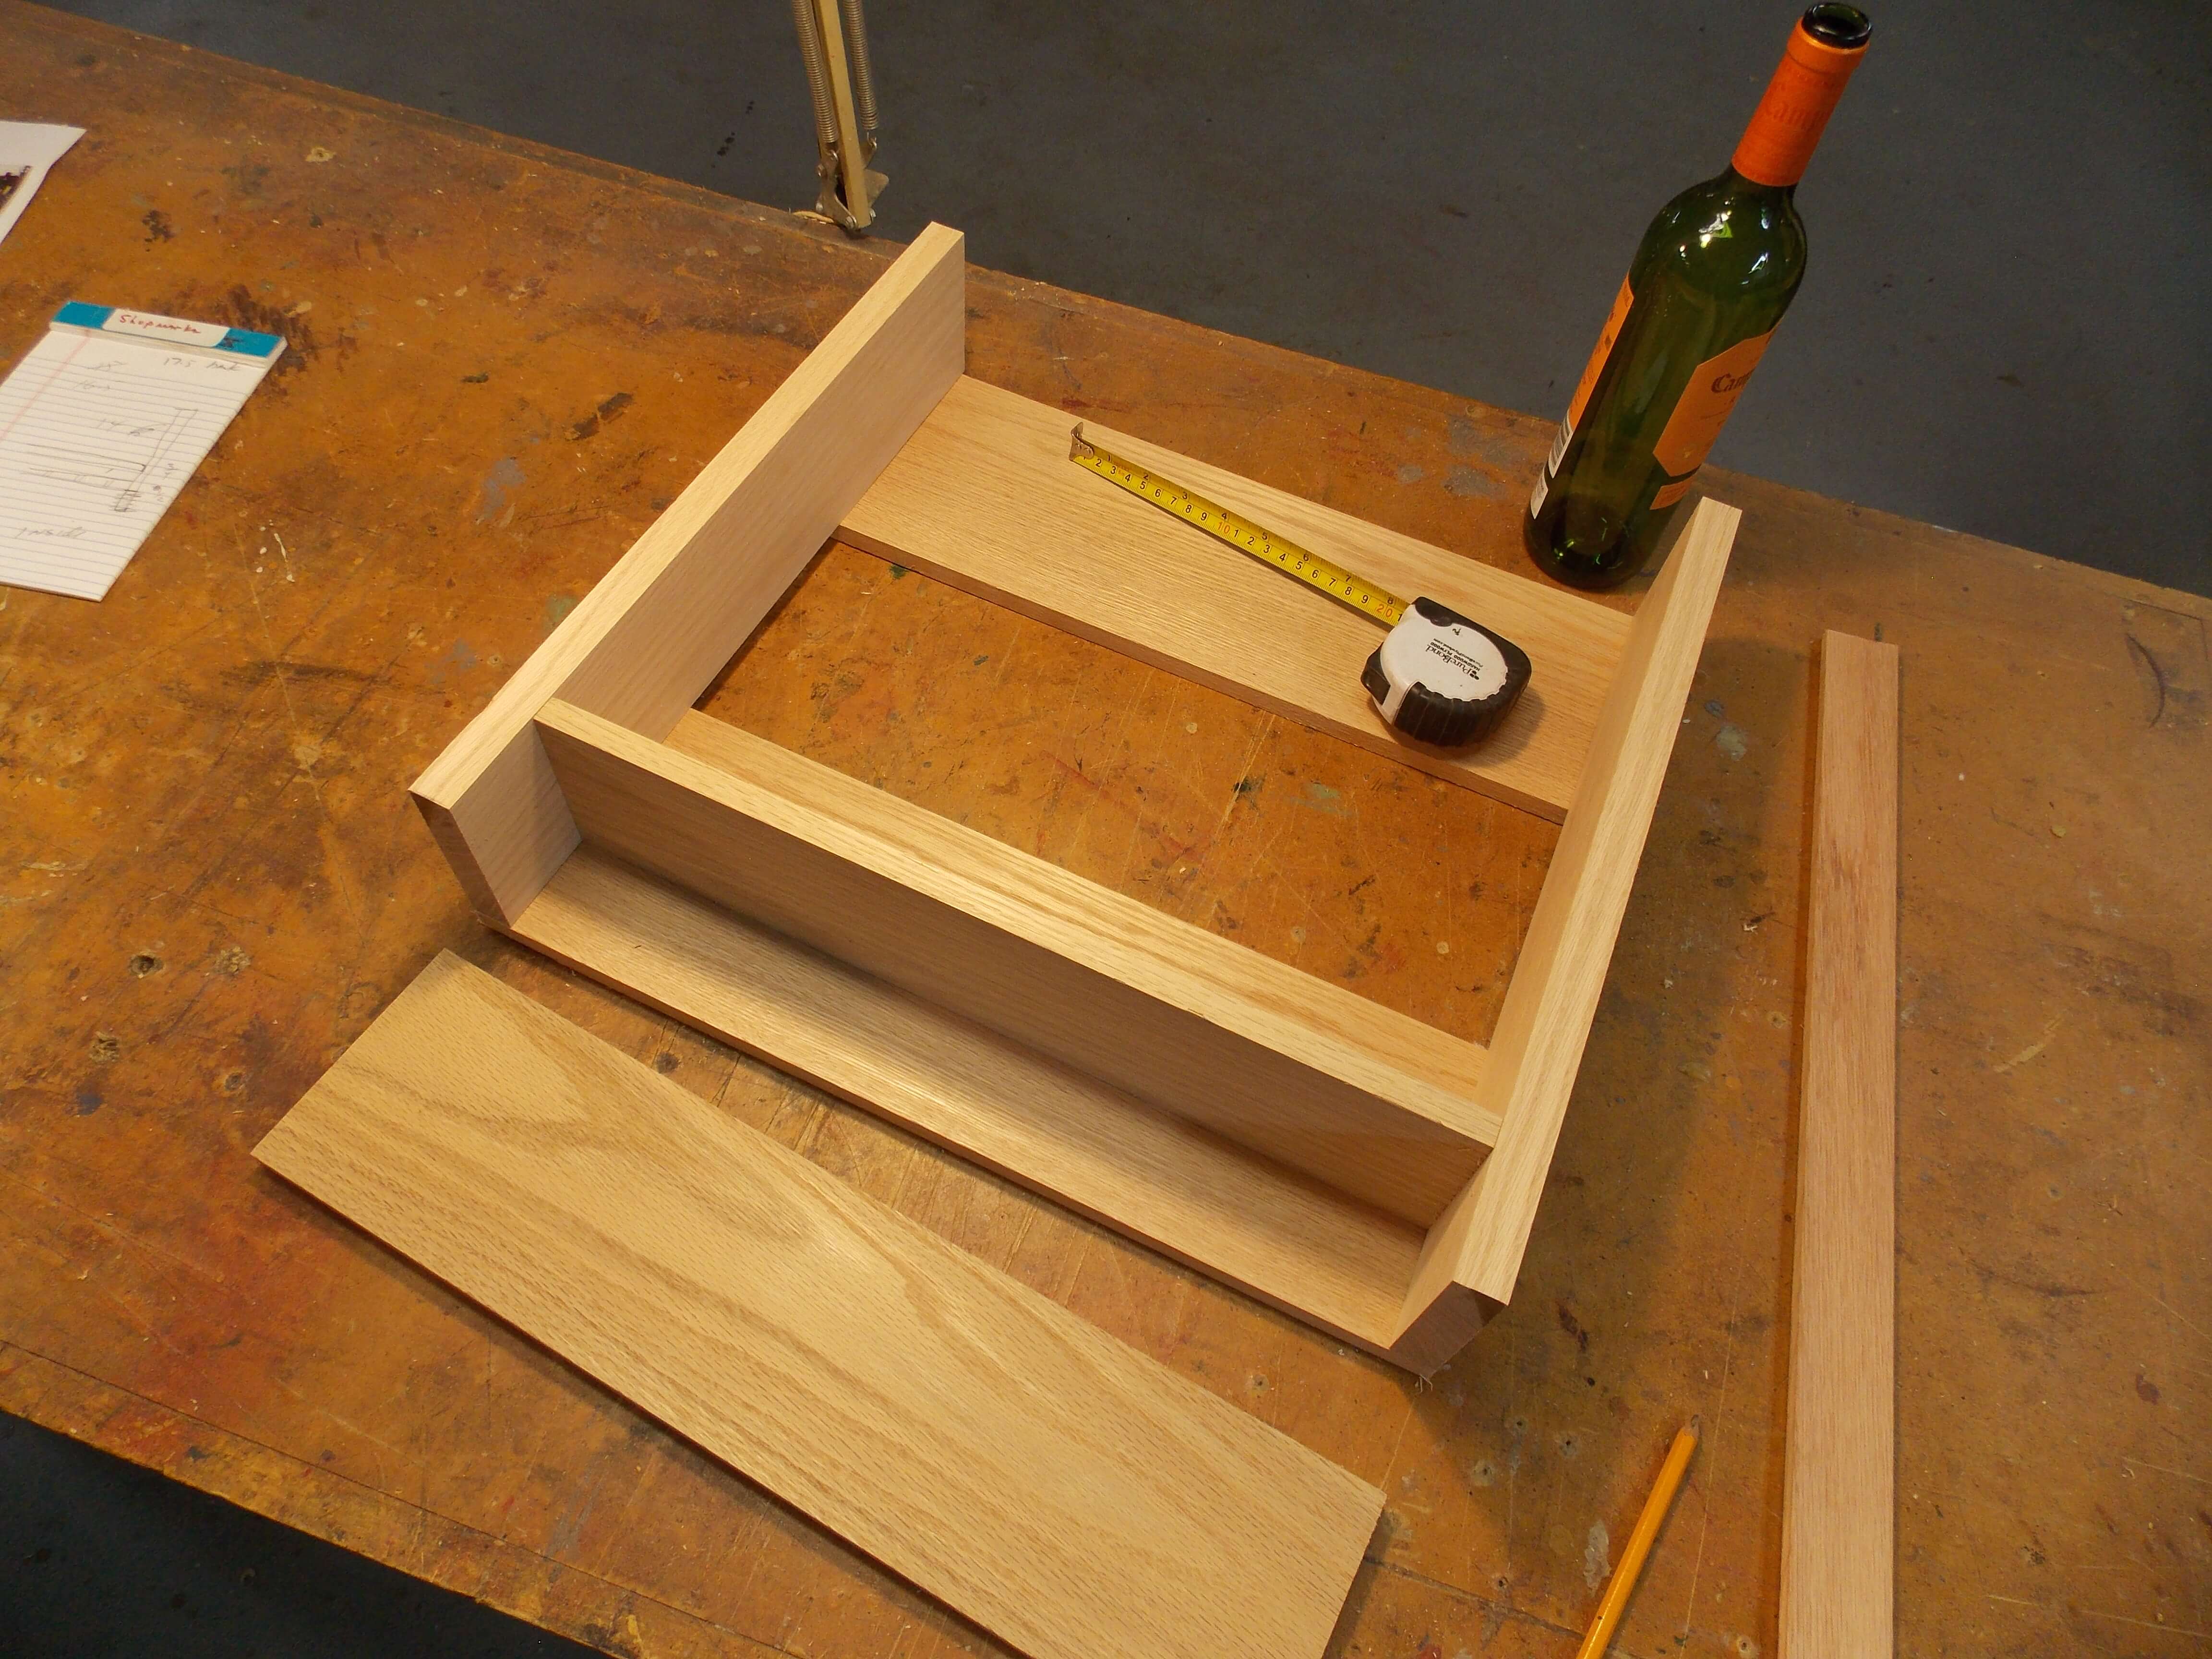 Measure wood pieces to fit the right number of wine bottles